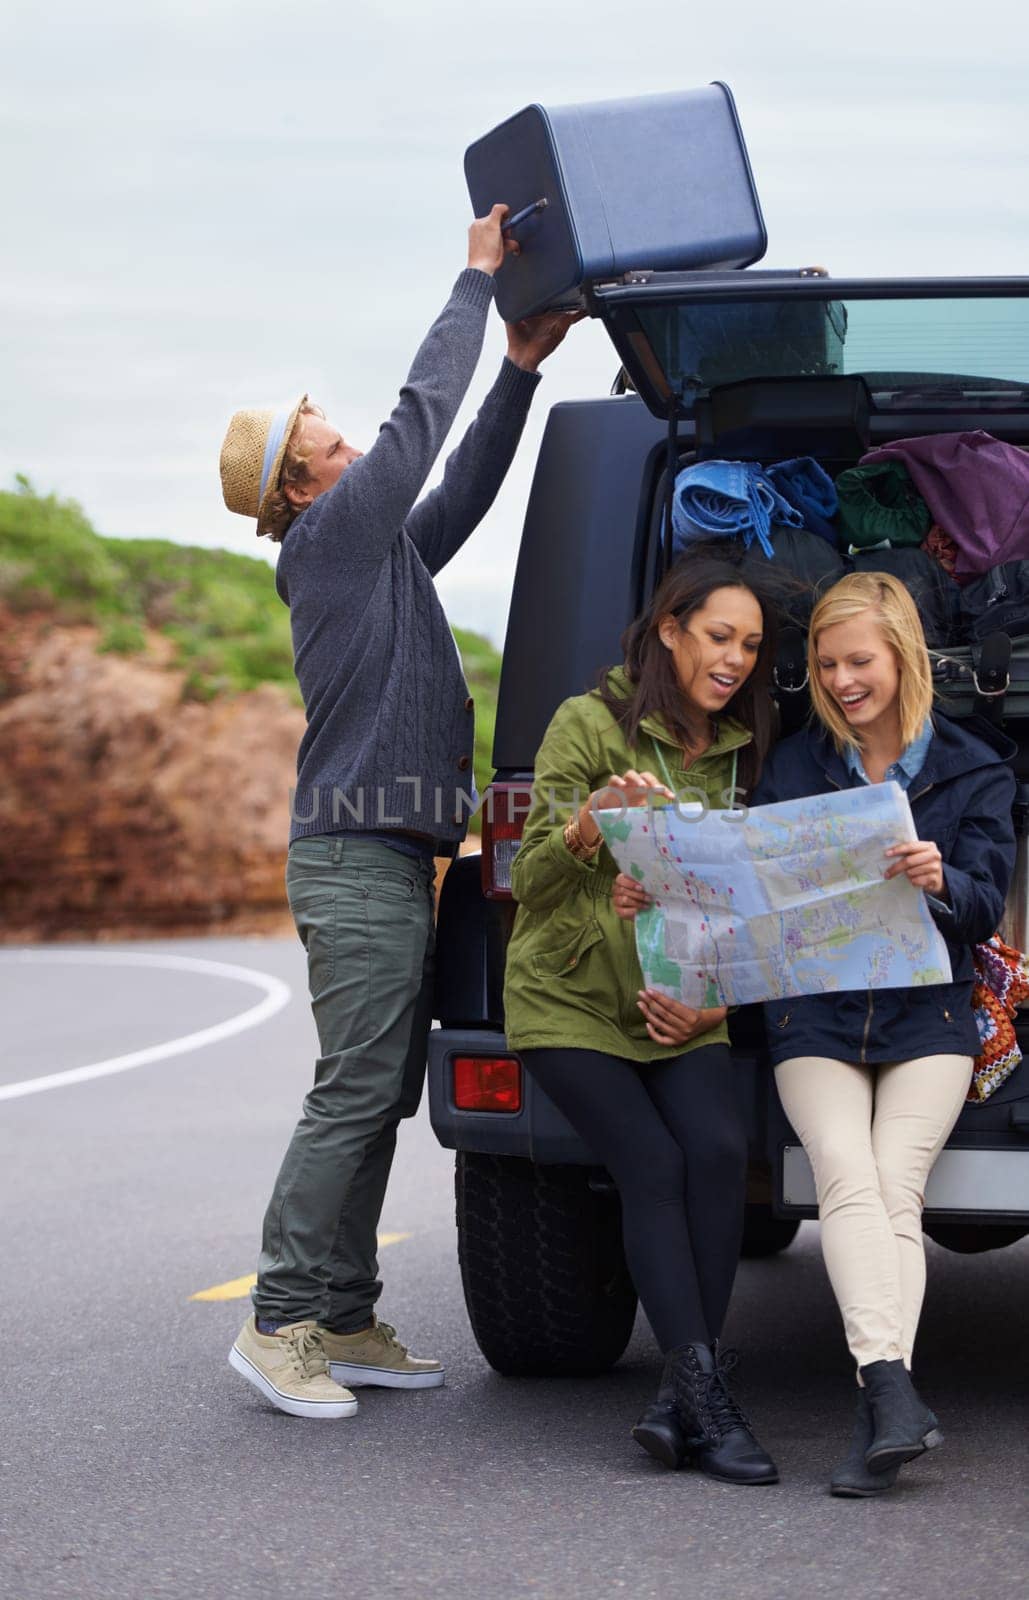 Happy woman, friends and map with a car full of luggage for road trip, destination or planning outdoor vacation. Group of young people checking travel guide and packing bags for adventure or journey.